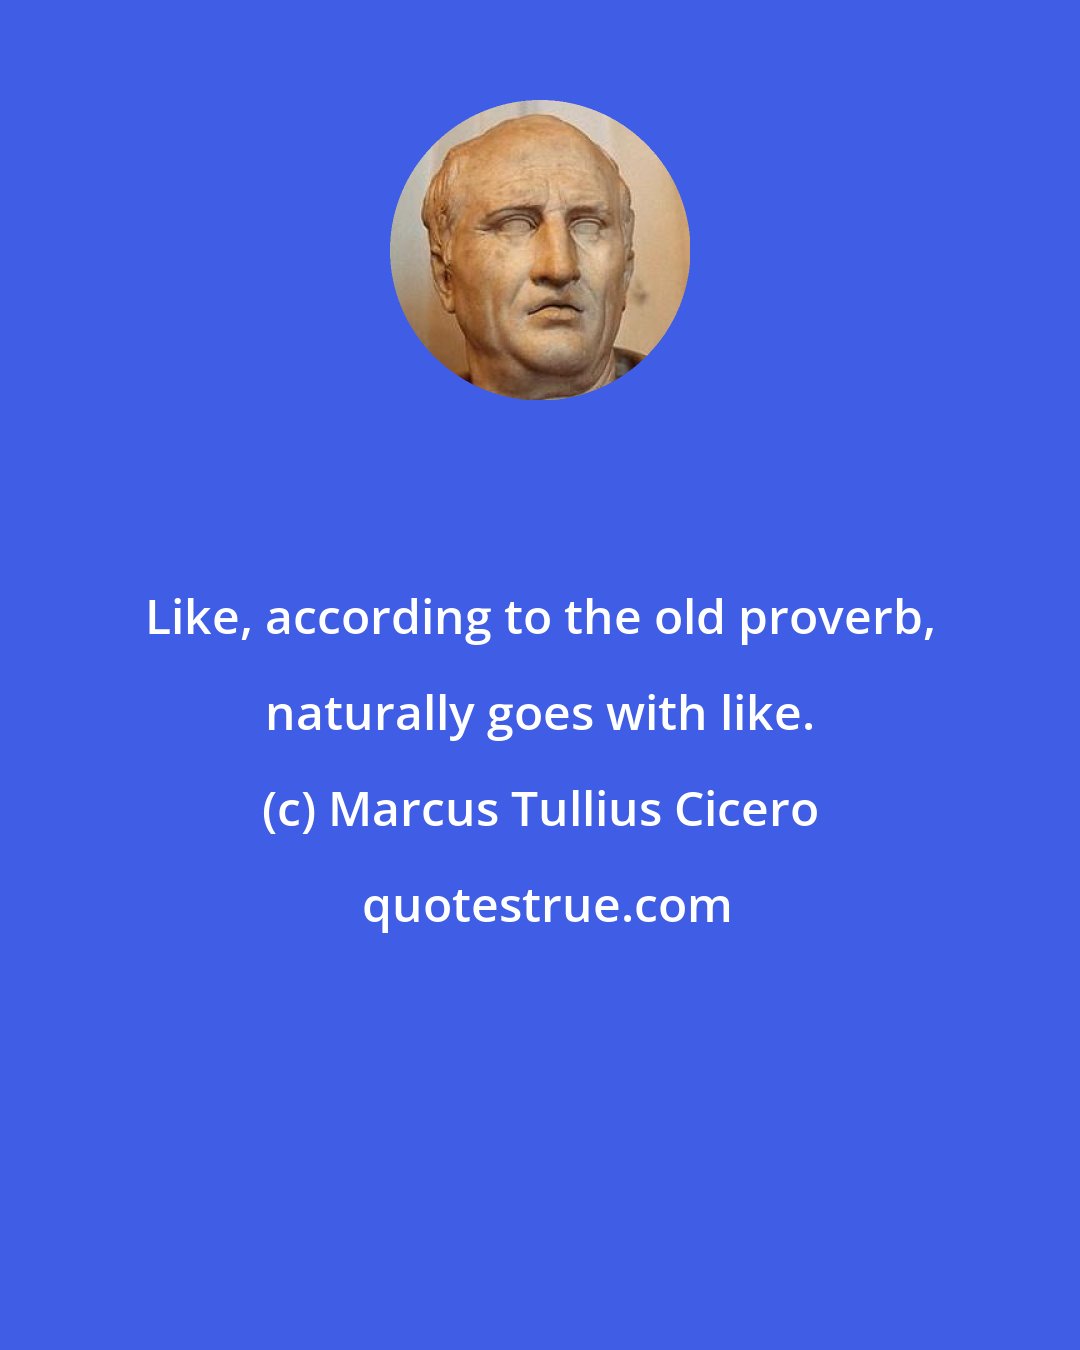 Marcus Tullius Cicero: Like, according to the old proverb, naturally goes with like.